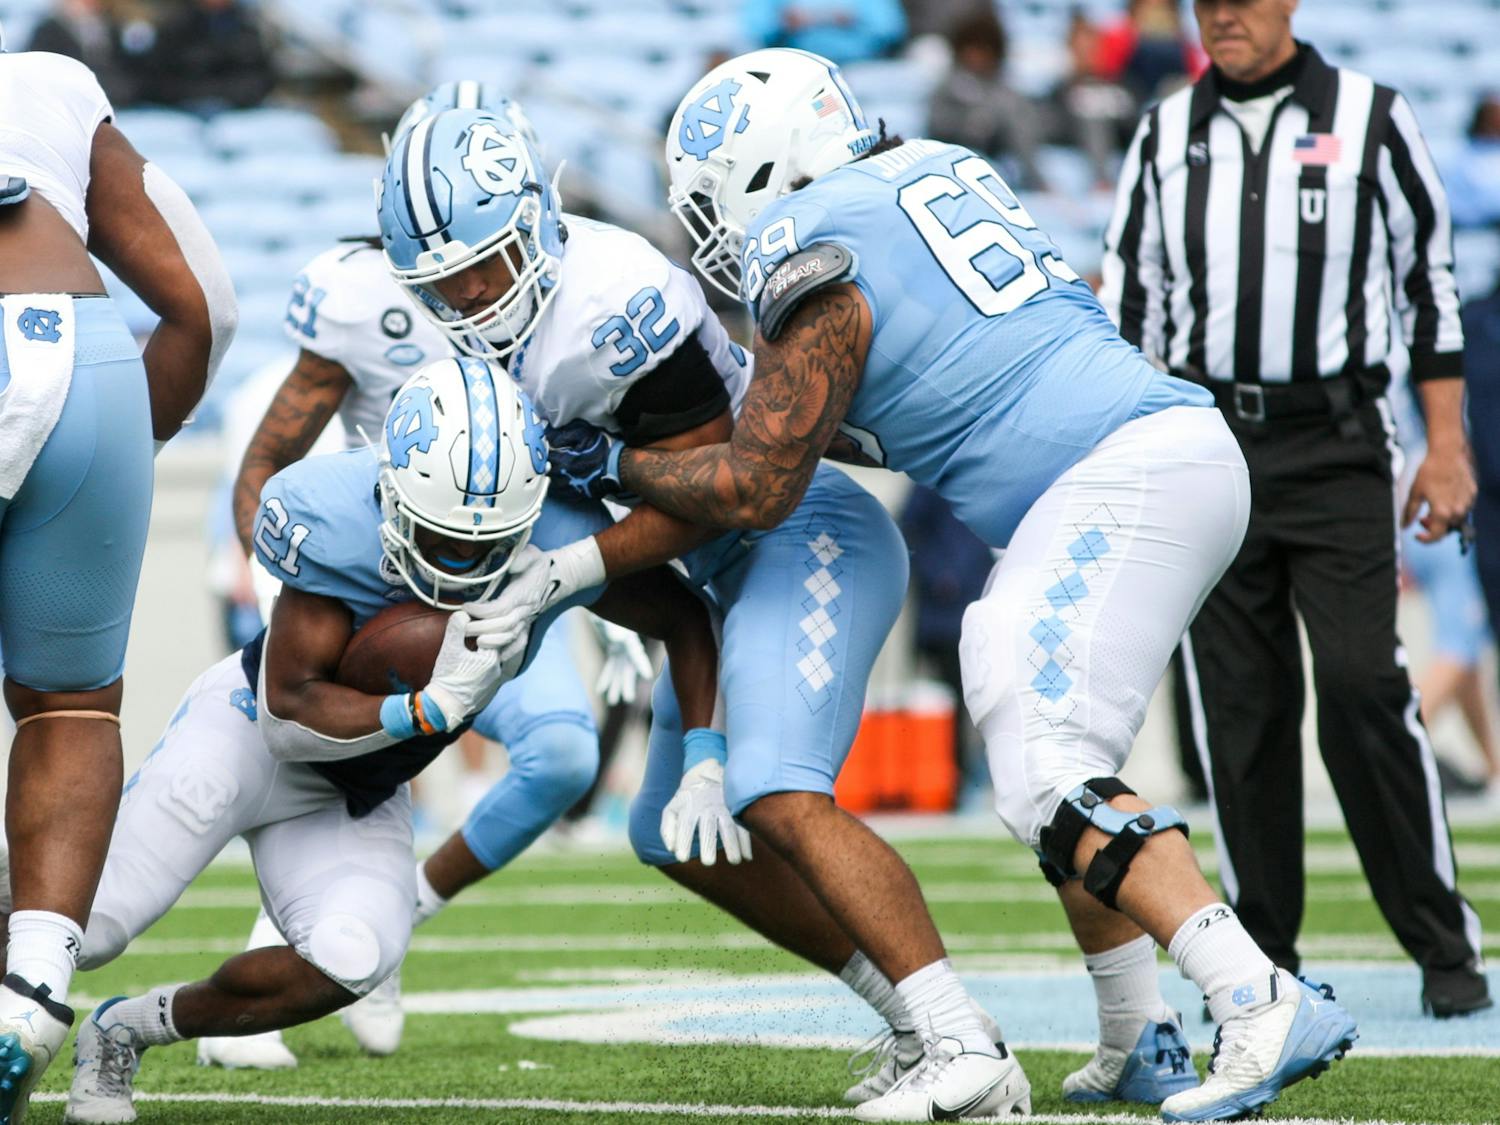 Sophomore running back Elijah Green (21) powers through the defensive line in the Spring Game on Saturday, April 9, 2022. The Tar Heels and Carolina tied, 14-14.